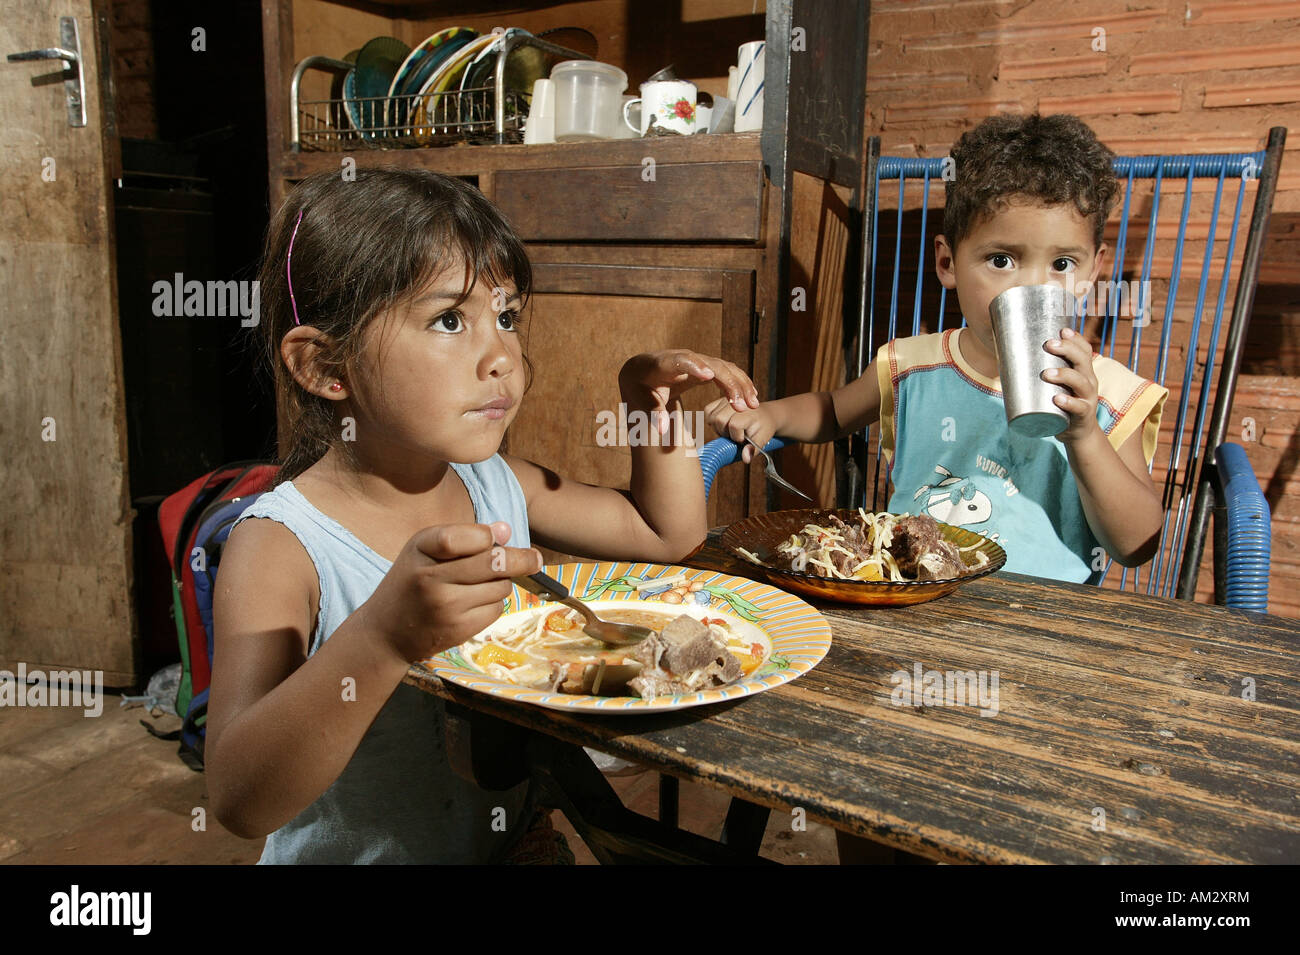 Guarani children eating, in the poor area of Chacarita, Asuncion, Paraguay, South America Stock Photo